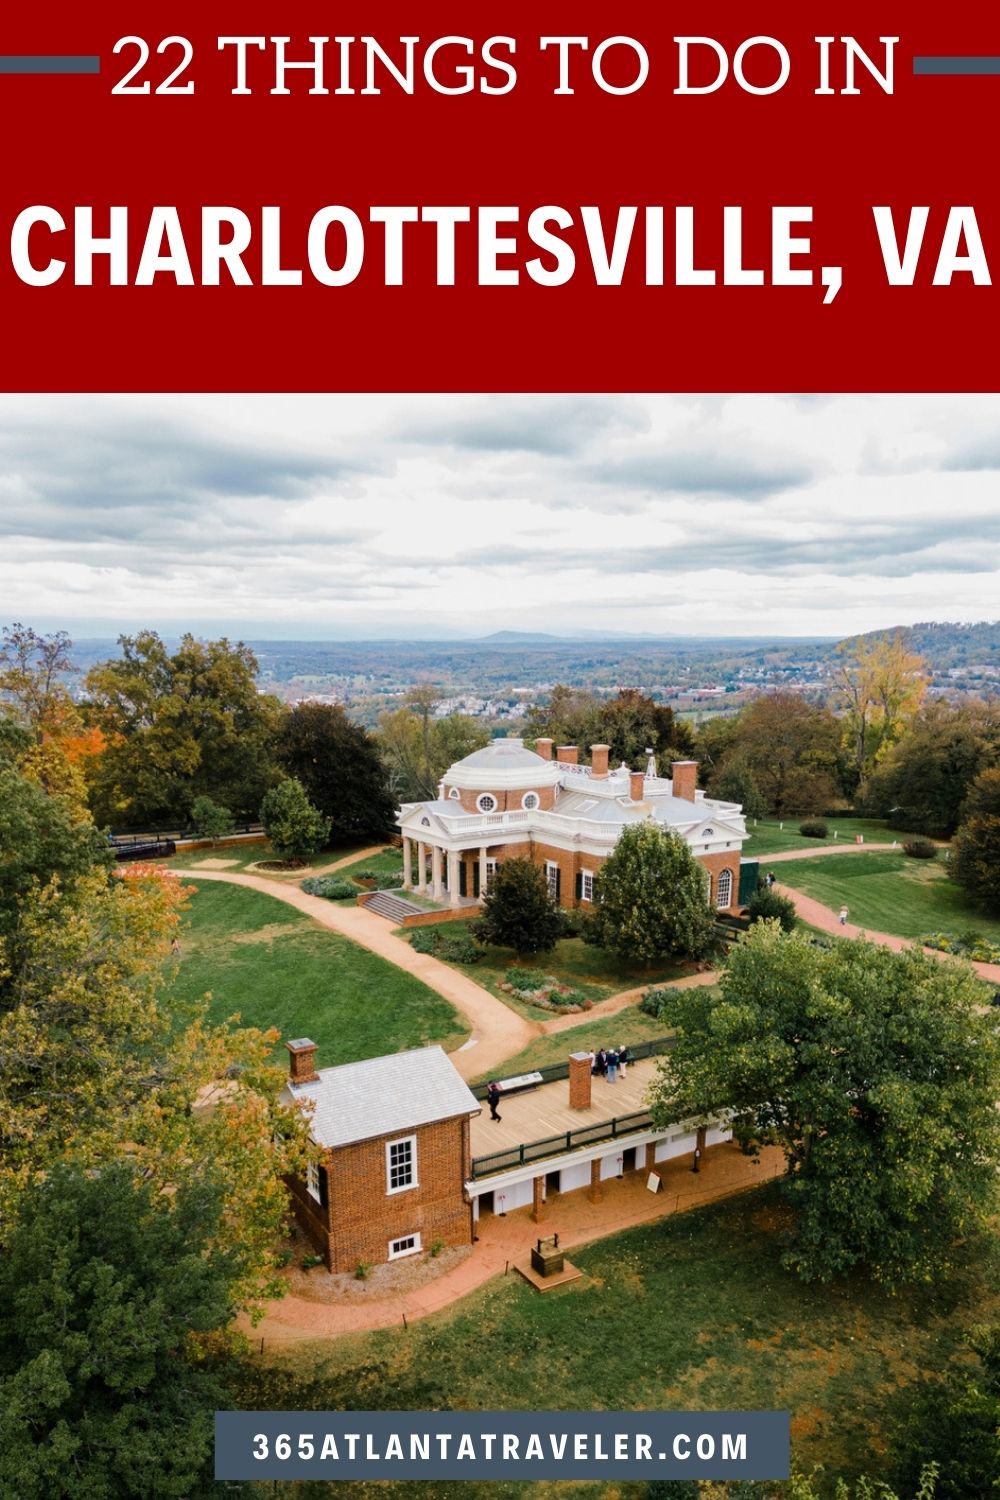 22 OUTSTANDING THINGS TO DO IN CHARLOTTESVILLE VA